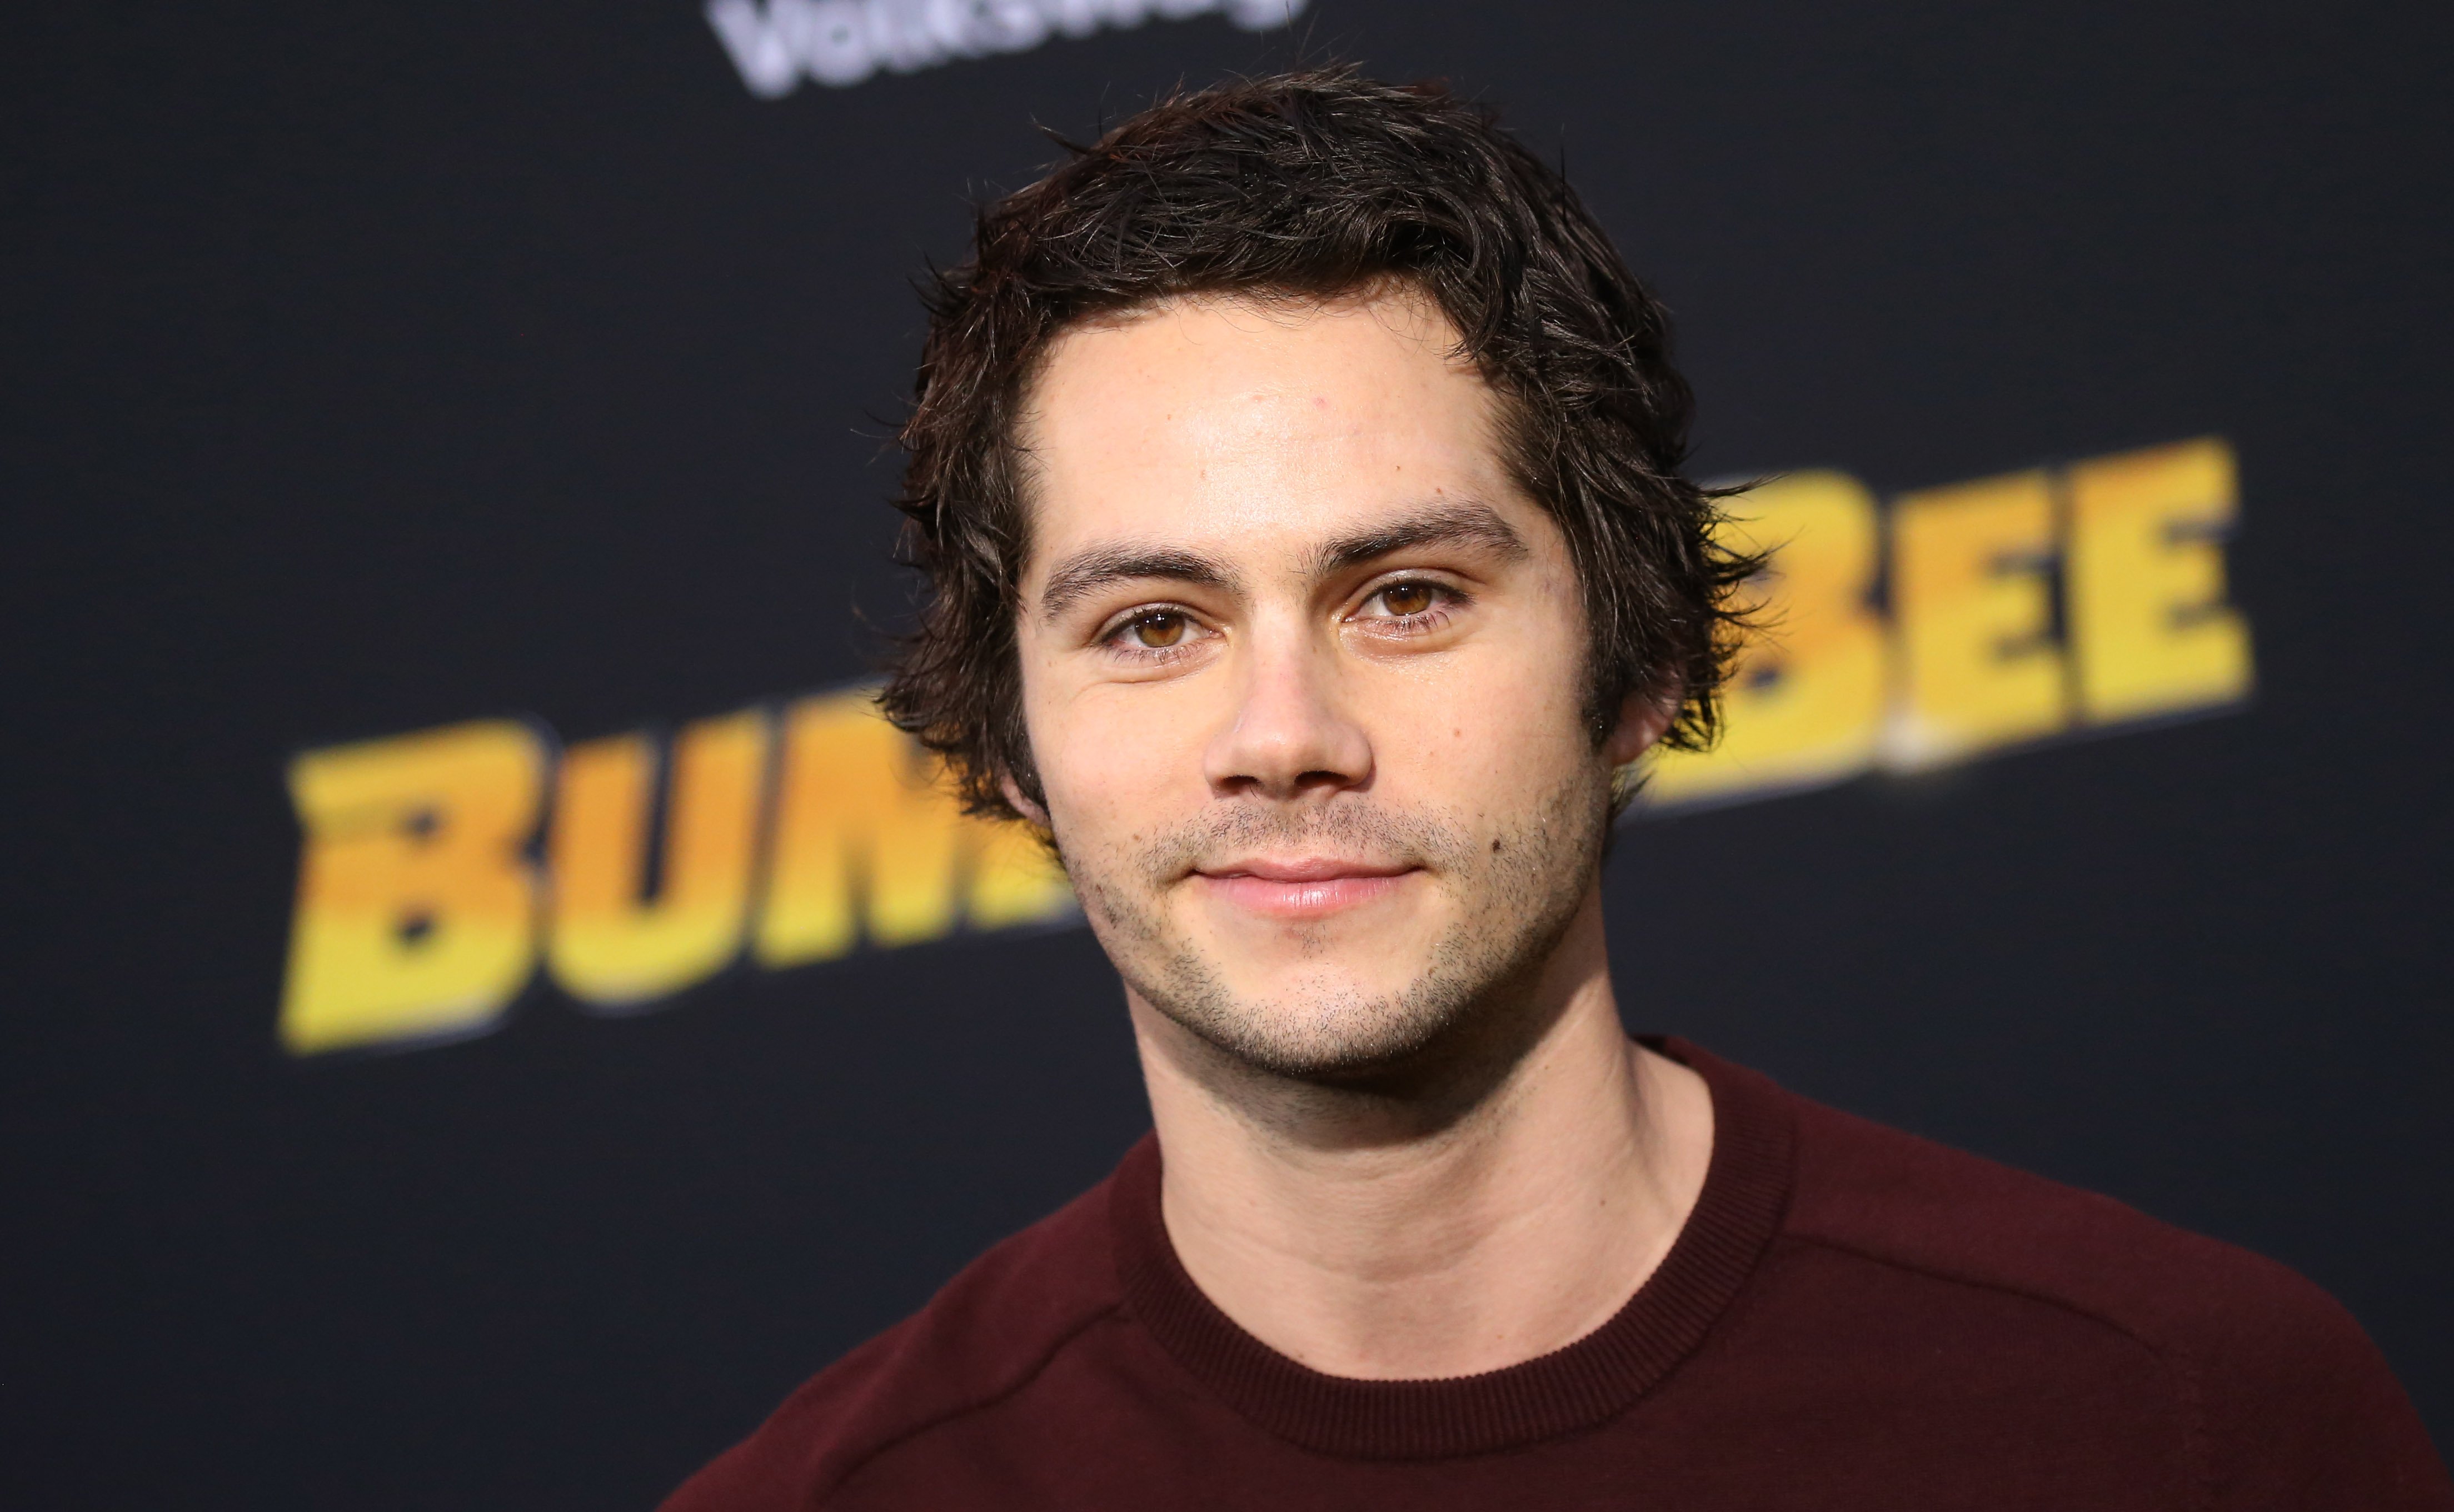 Dylan O'Brien, who is rumored to play Dick Grayson in 'Batgirl,' wears a maroon sweater.